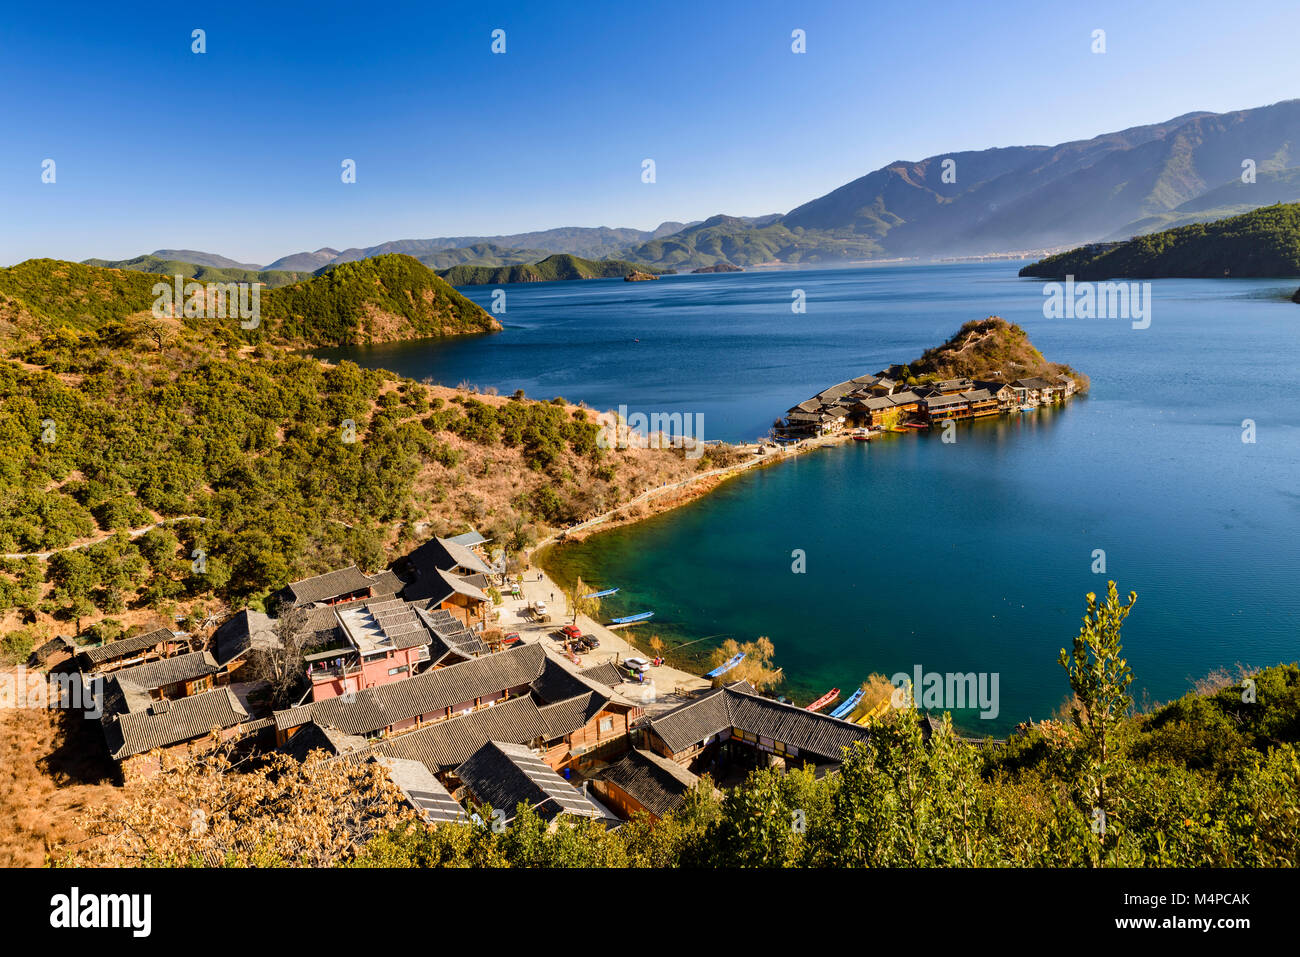 The iconic view of Lugu Lake which borders Yunnan and Sichuan provinces, It is a beautiful location but not many tourists. Stock Photo